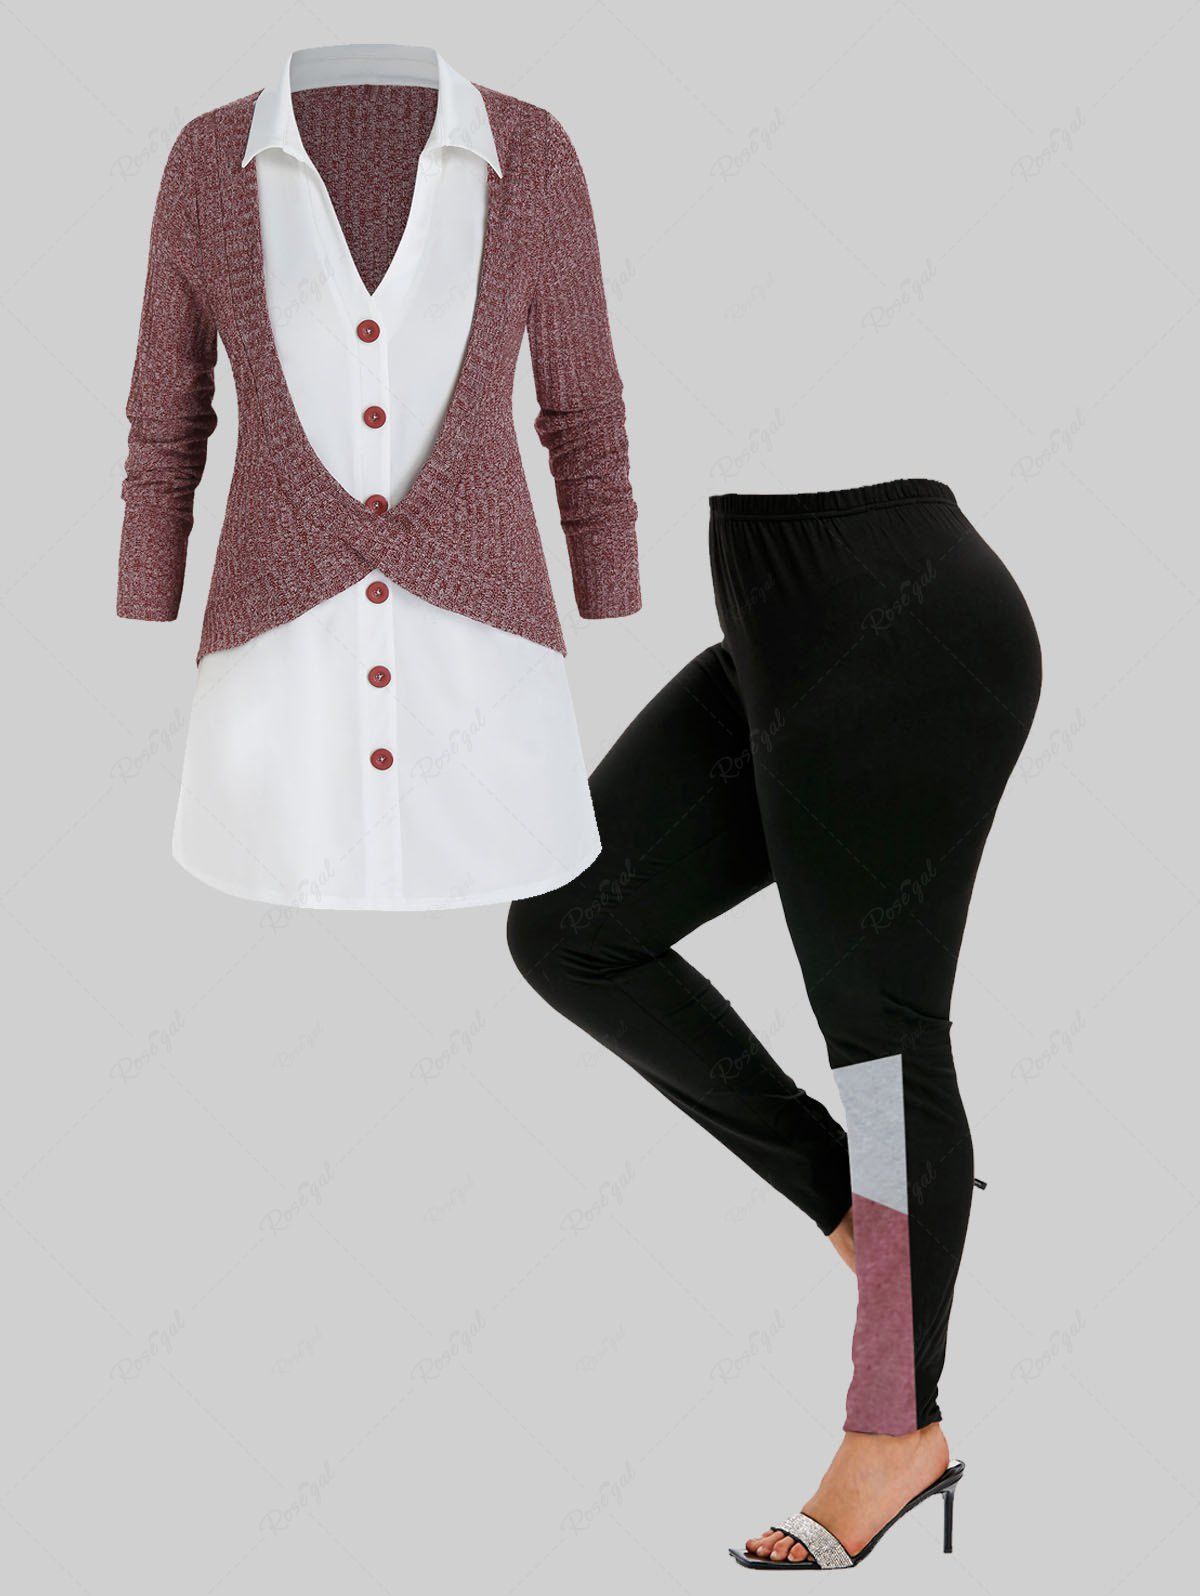 Fashion 2 In 1 Button Front Bicolor Knit Sweater and Colorblock Leggings Plus Size Outfit  